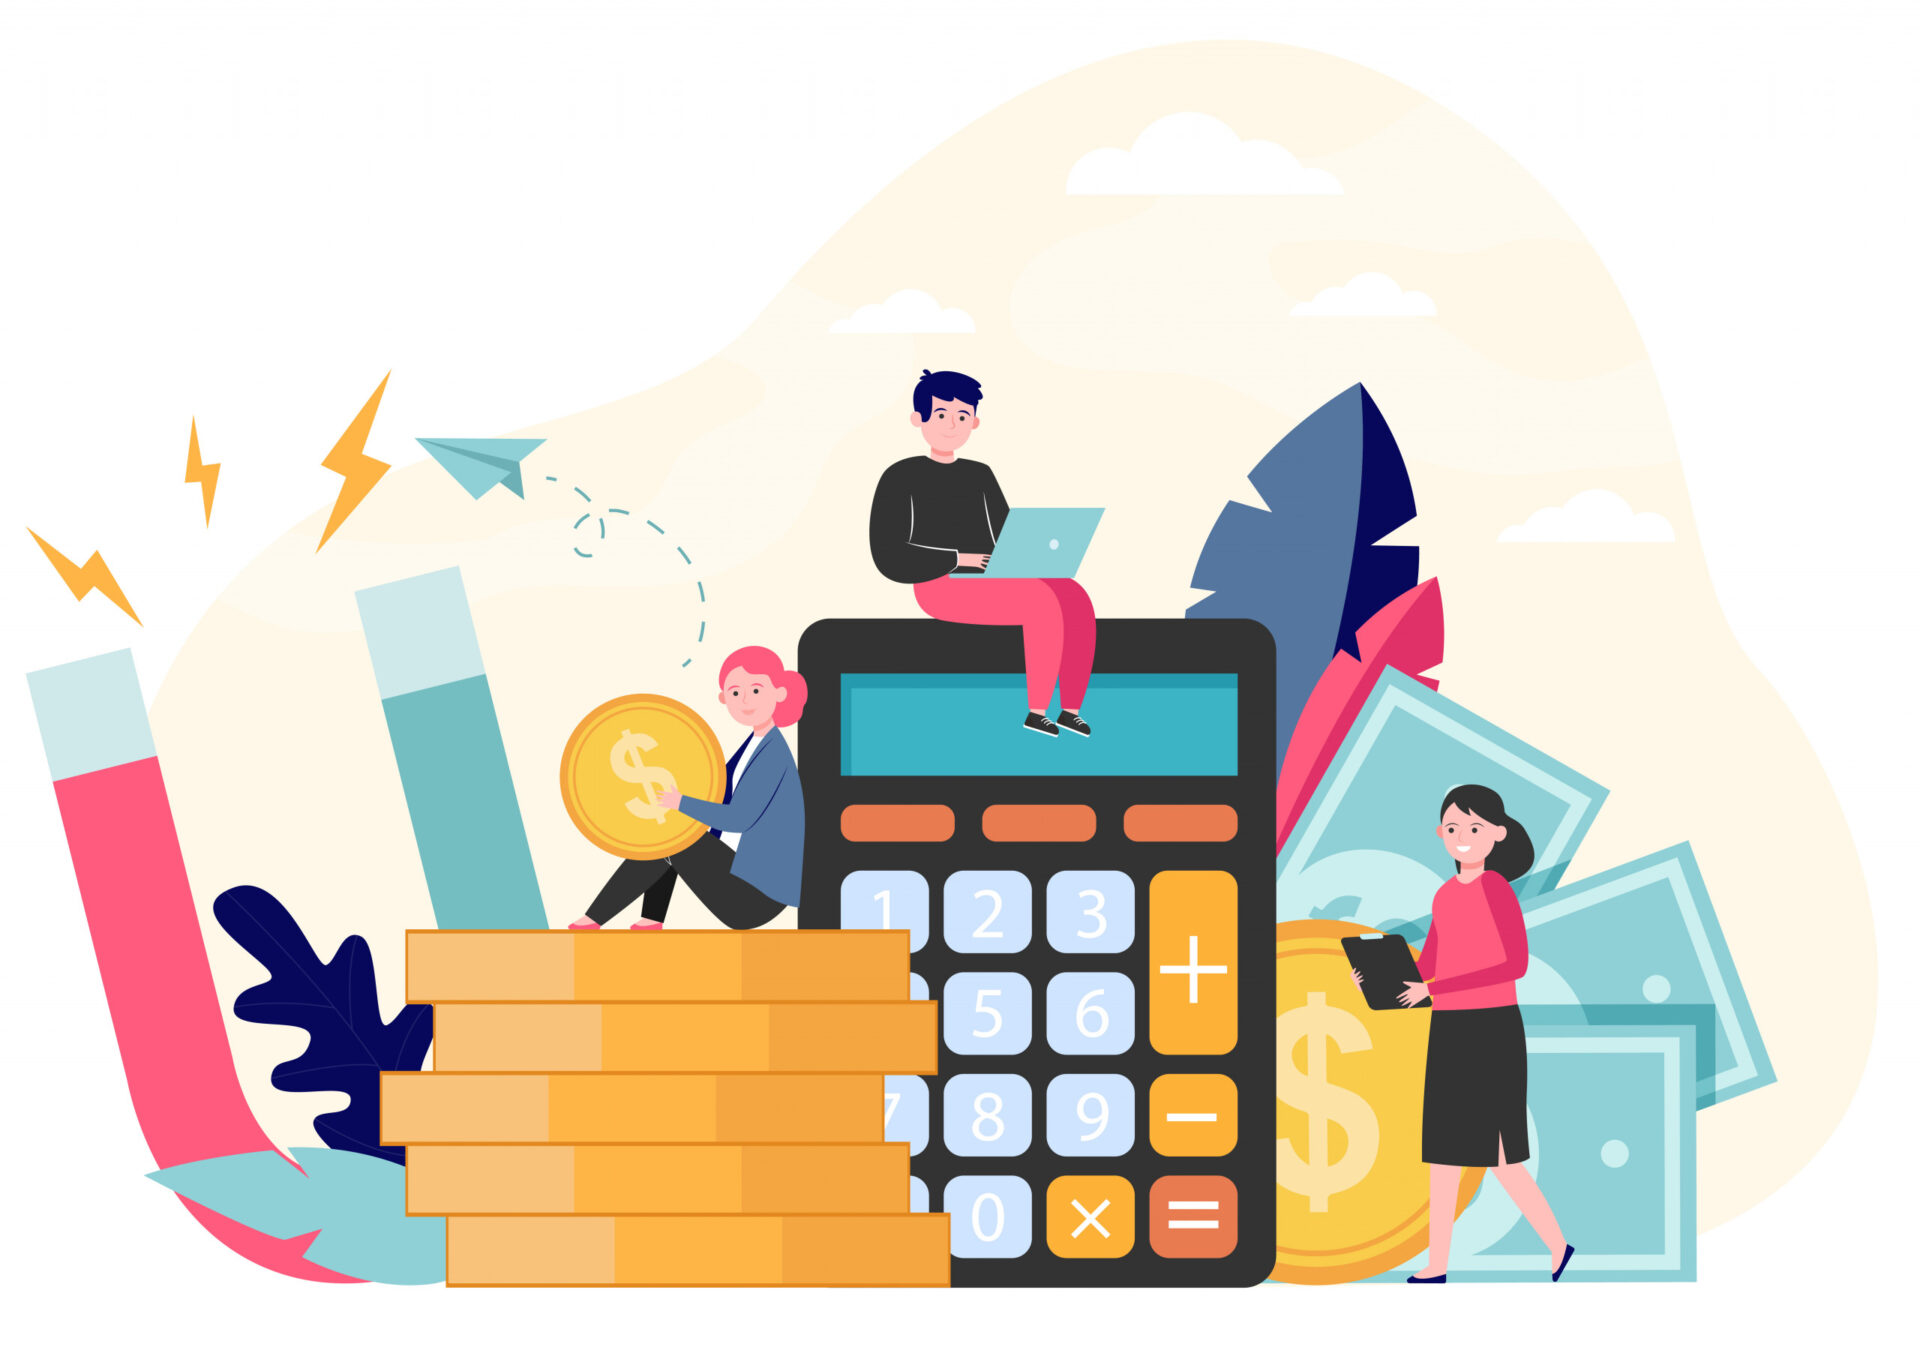 An image of a huge calculator and some other icons and in employee sitting at the top of it